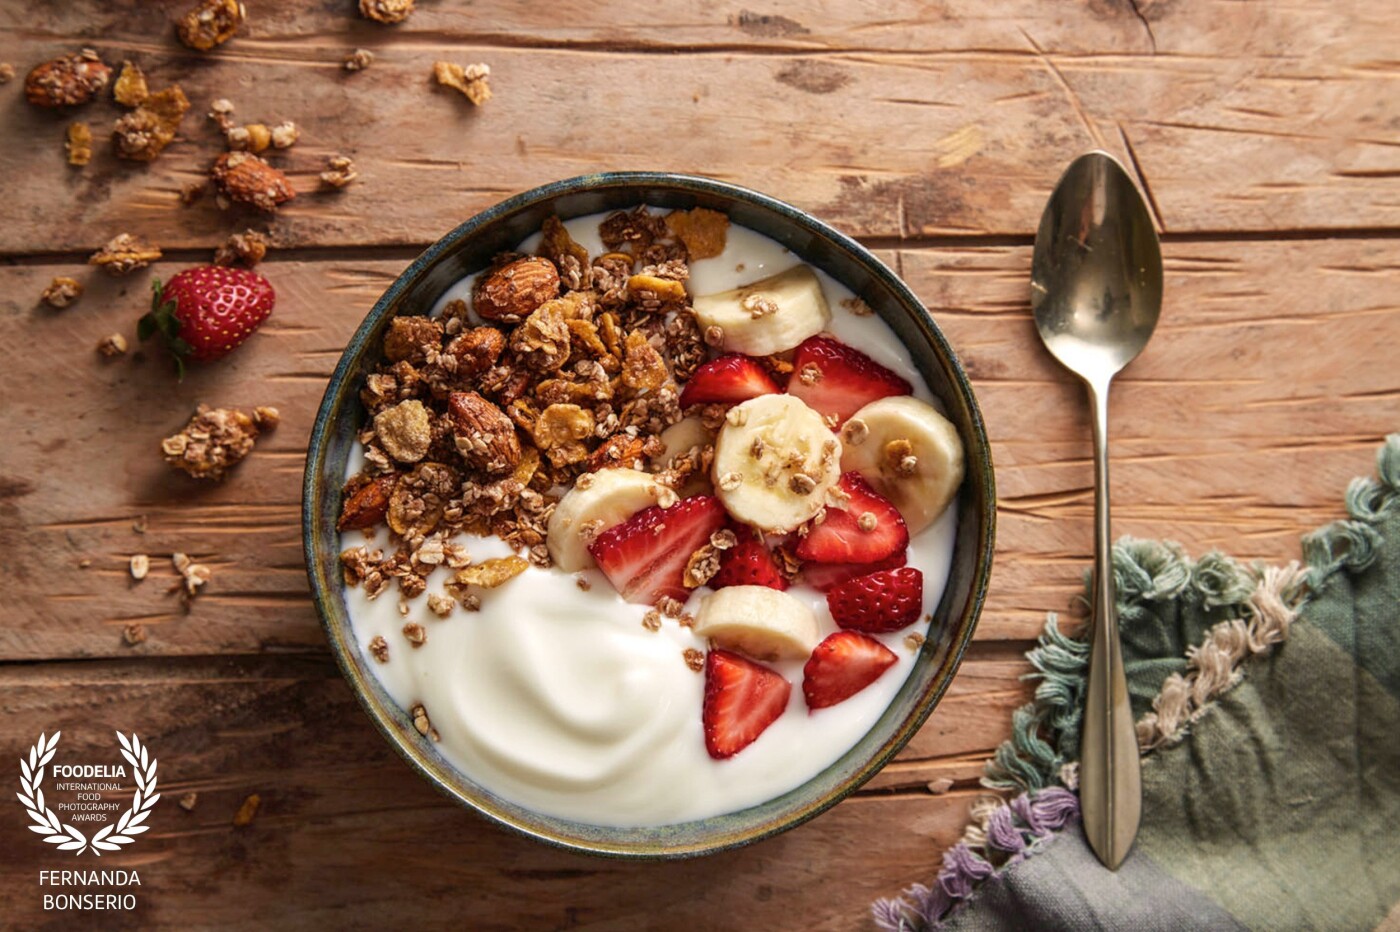 I never get tired of taking pictures of yogurt and granola! Despite the freshness of the dish, we wanted to give it a warm touch as well as being homemade and healthy.<br />
Work is done with food stylist @marieboni